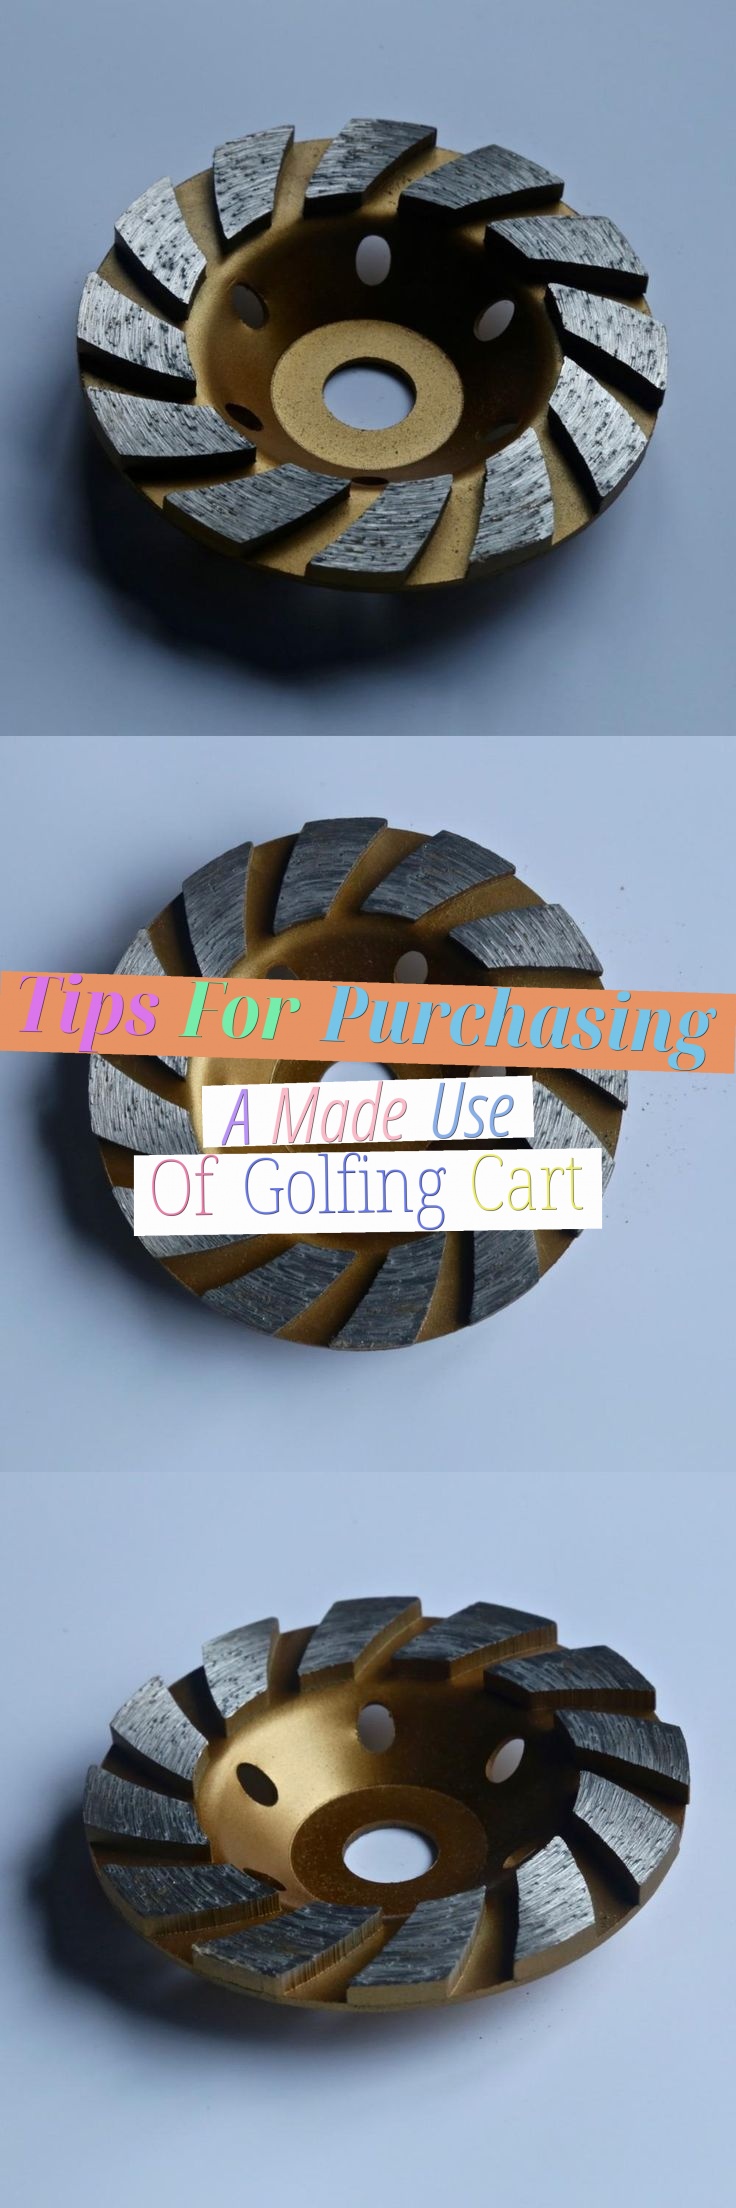 Tips For Purchasing A Made Use Of Golfing Cart